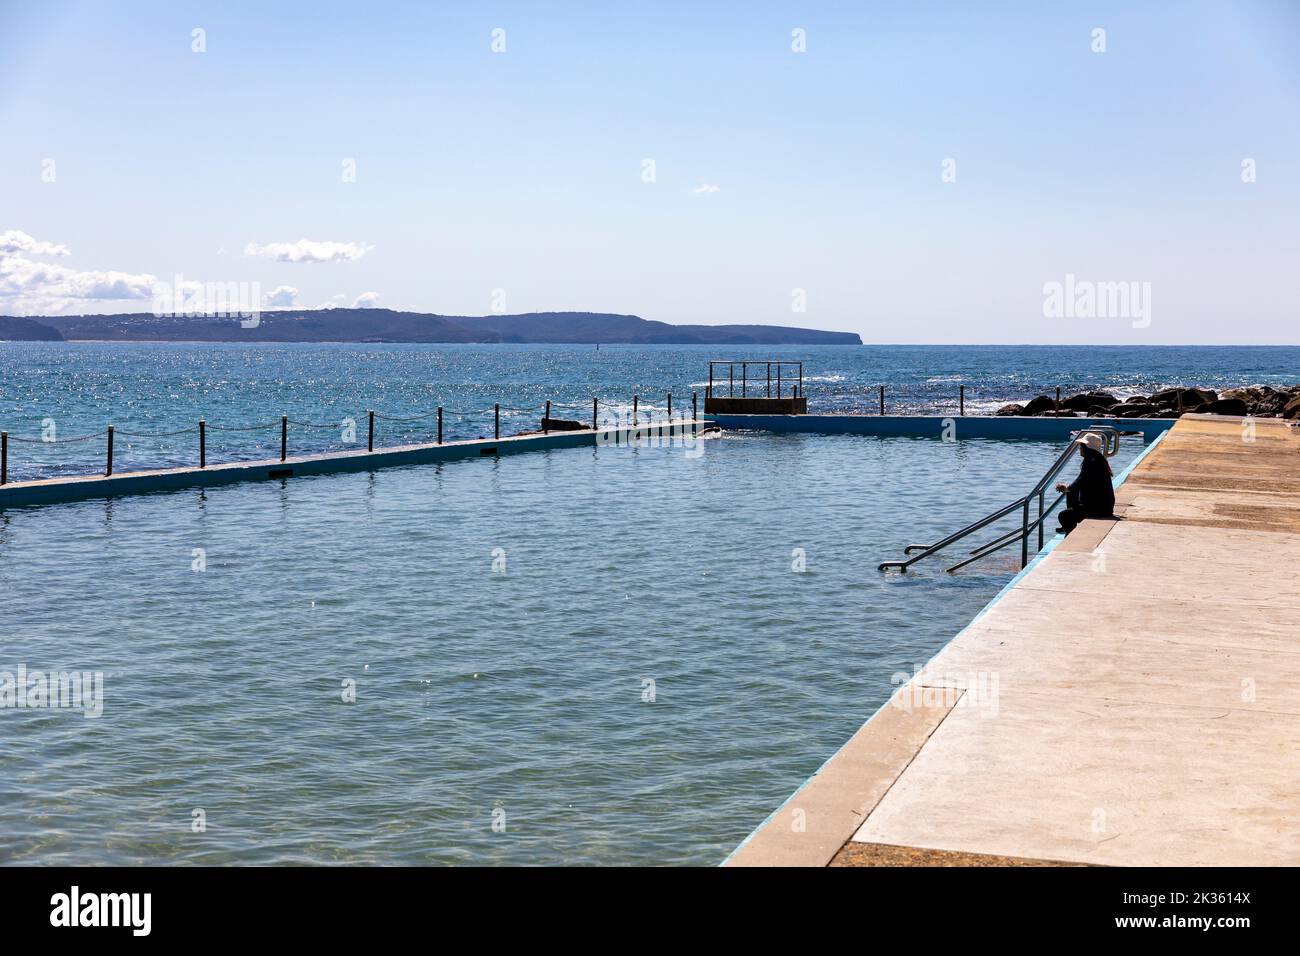 Palm Beach swimming rock pool with lady sitting beside the pool and view of the Central Coast of New South Wales,Australia Stock Photo